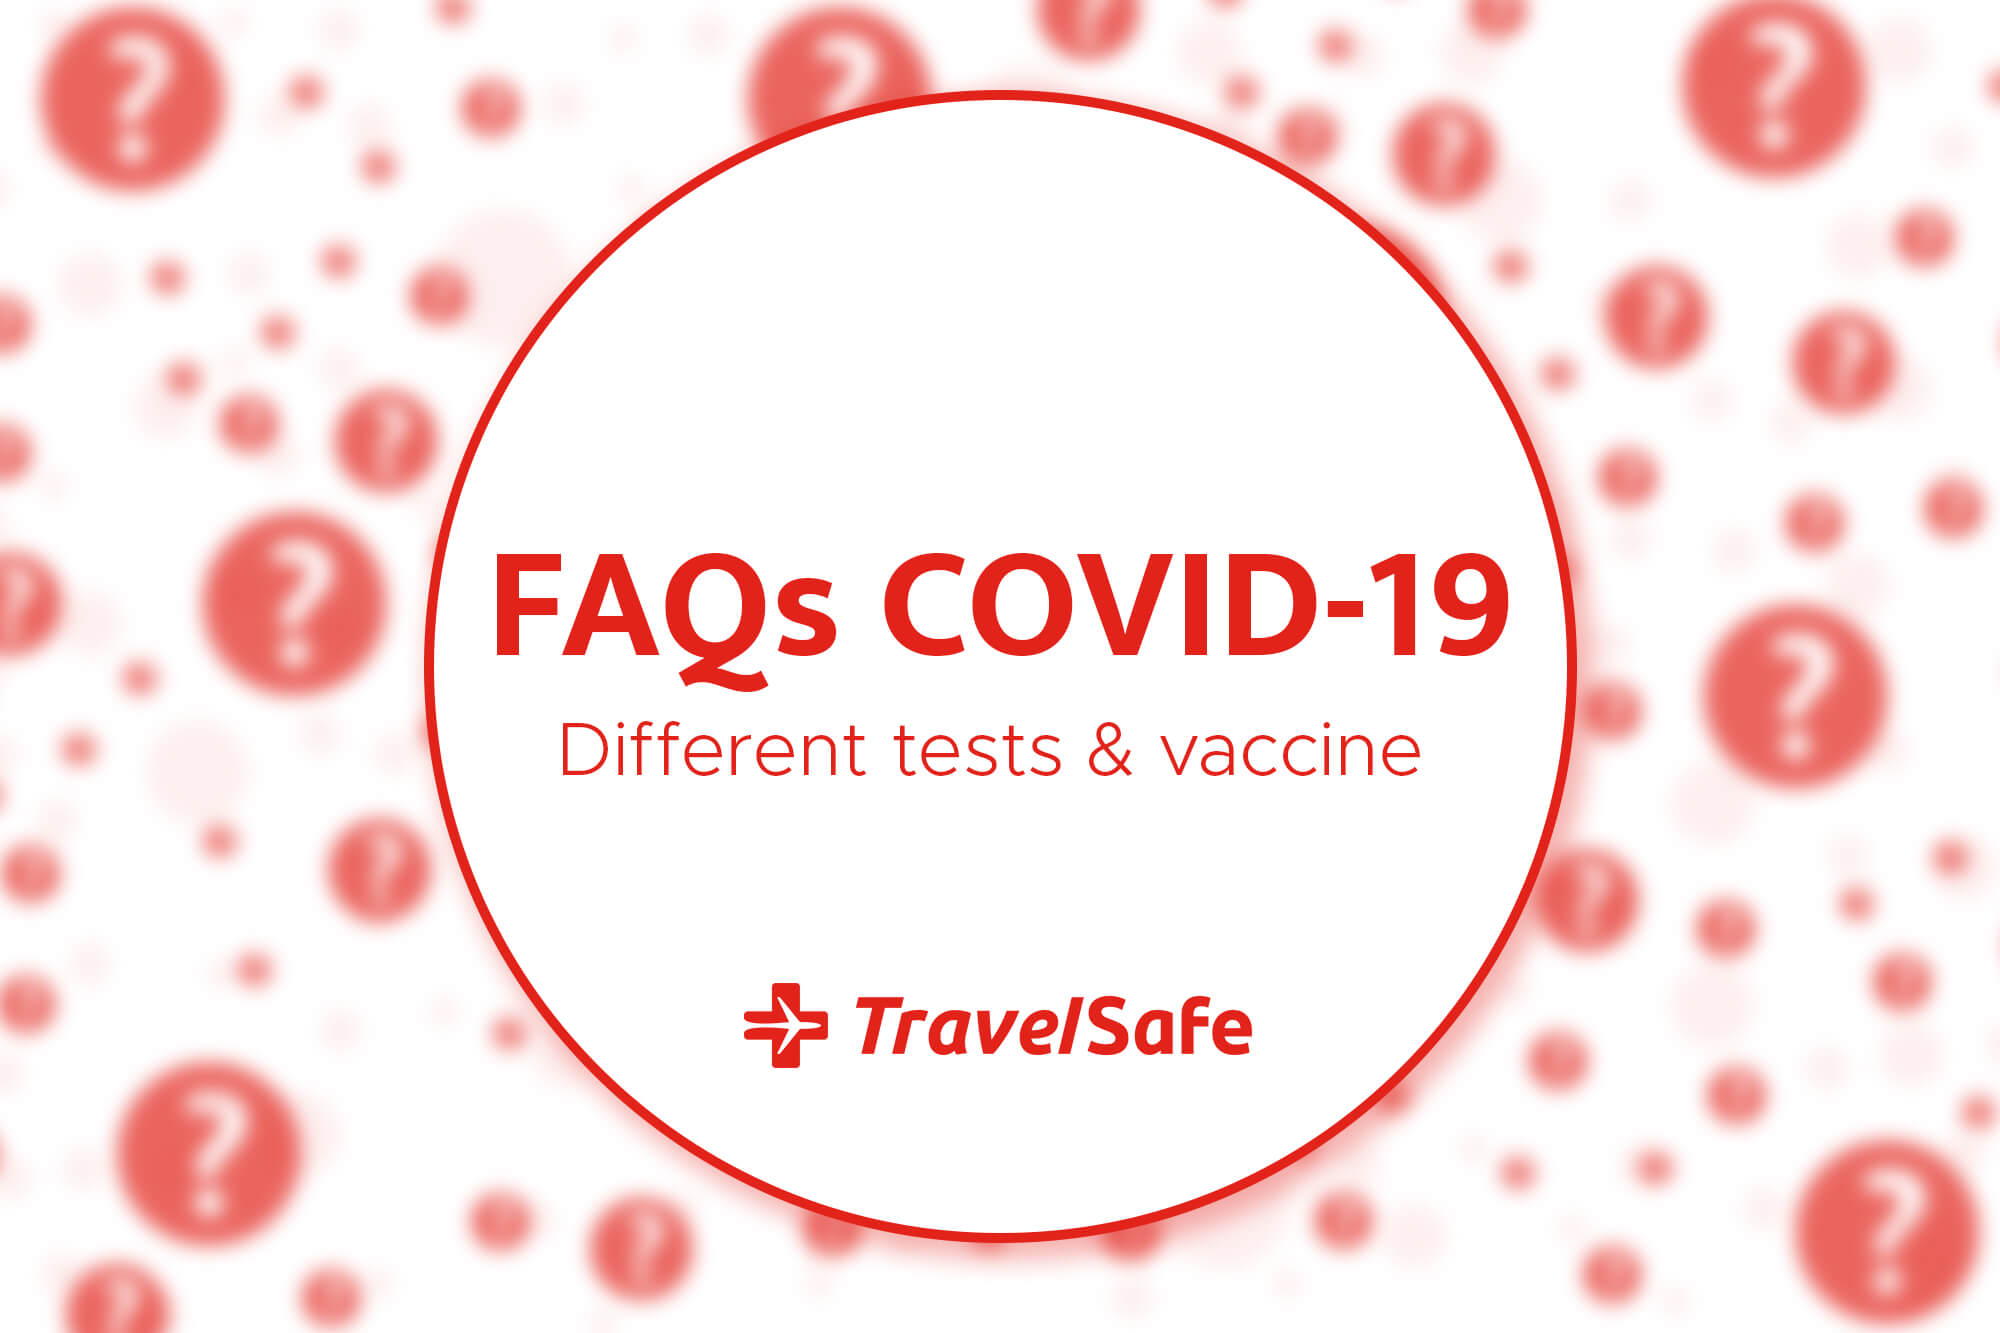 COVID-19 Tests different types and their benefits